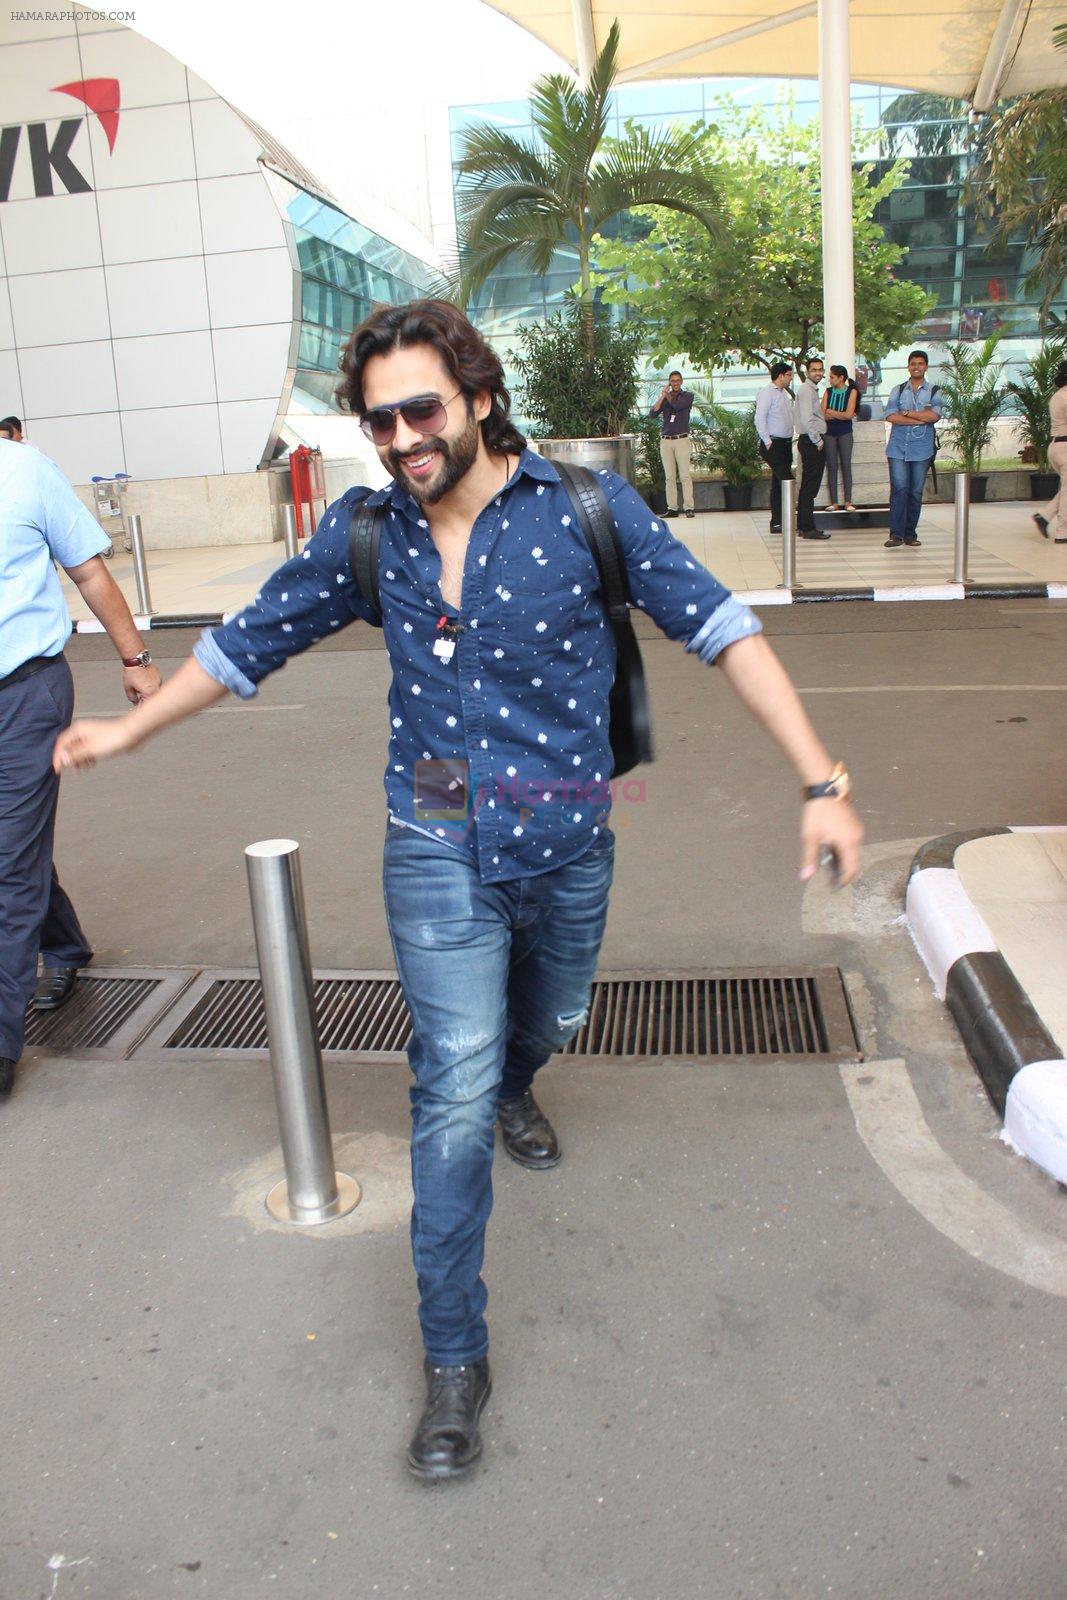 Jackky Bhagnani snapped at airport on 1st March 2016